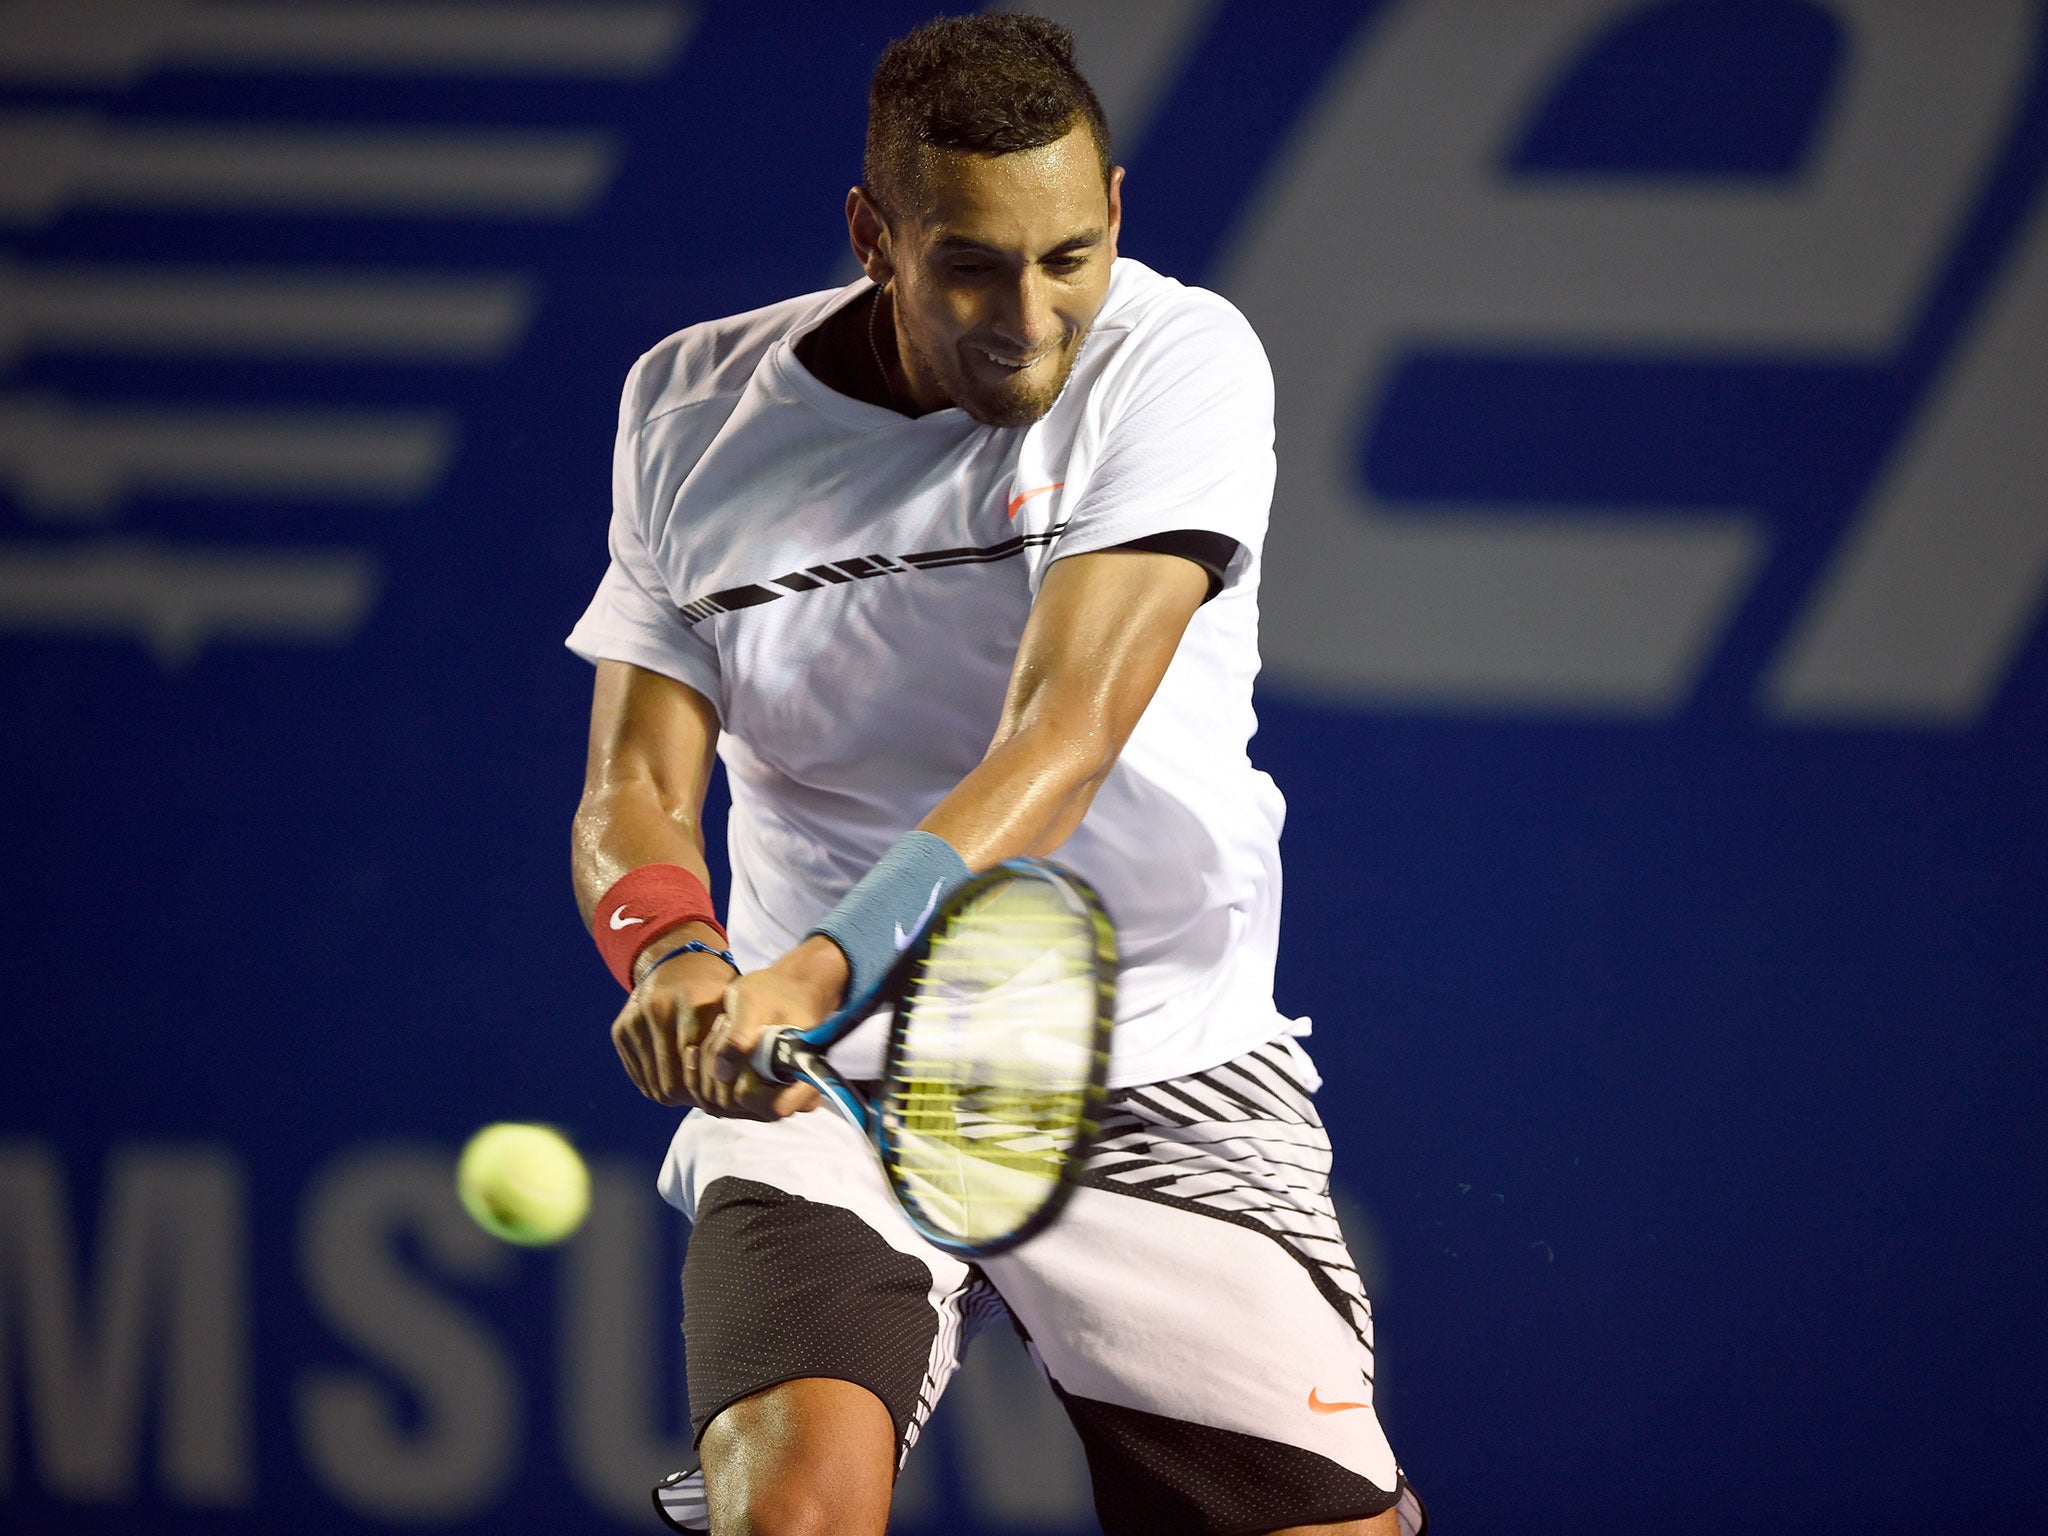 The victory was one of the biggest of Kyrgios's career